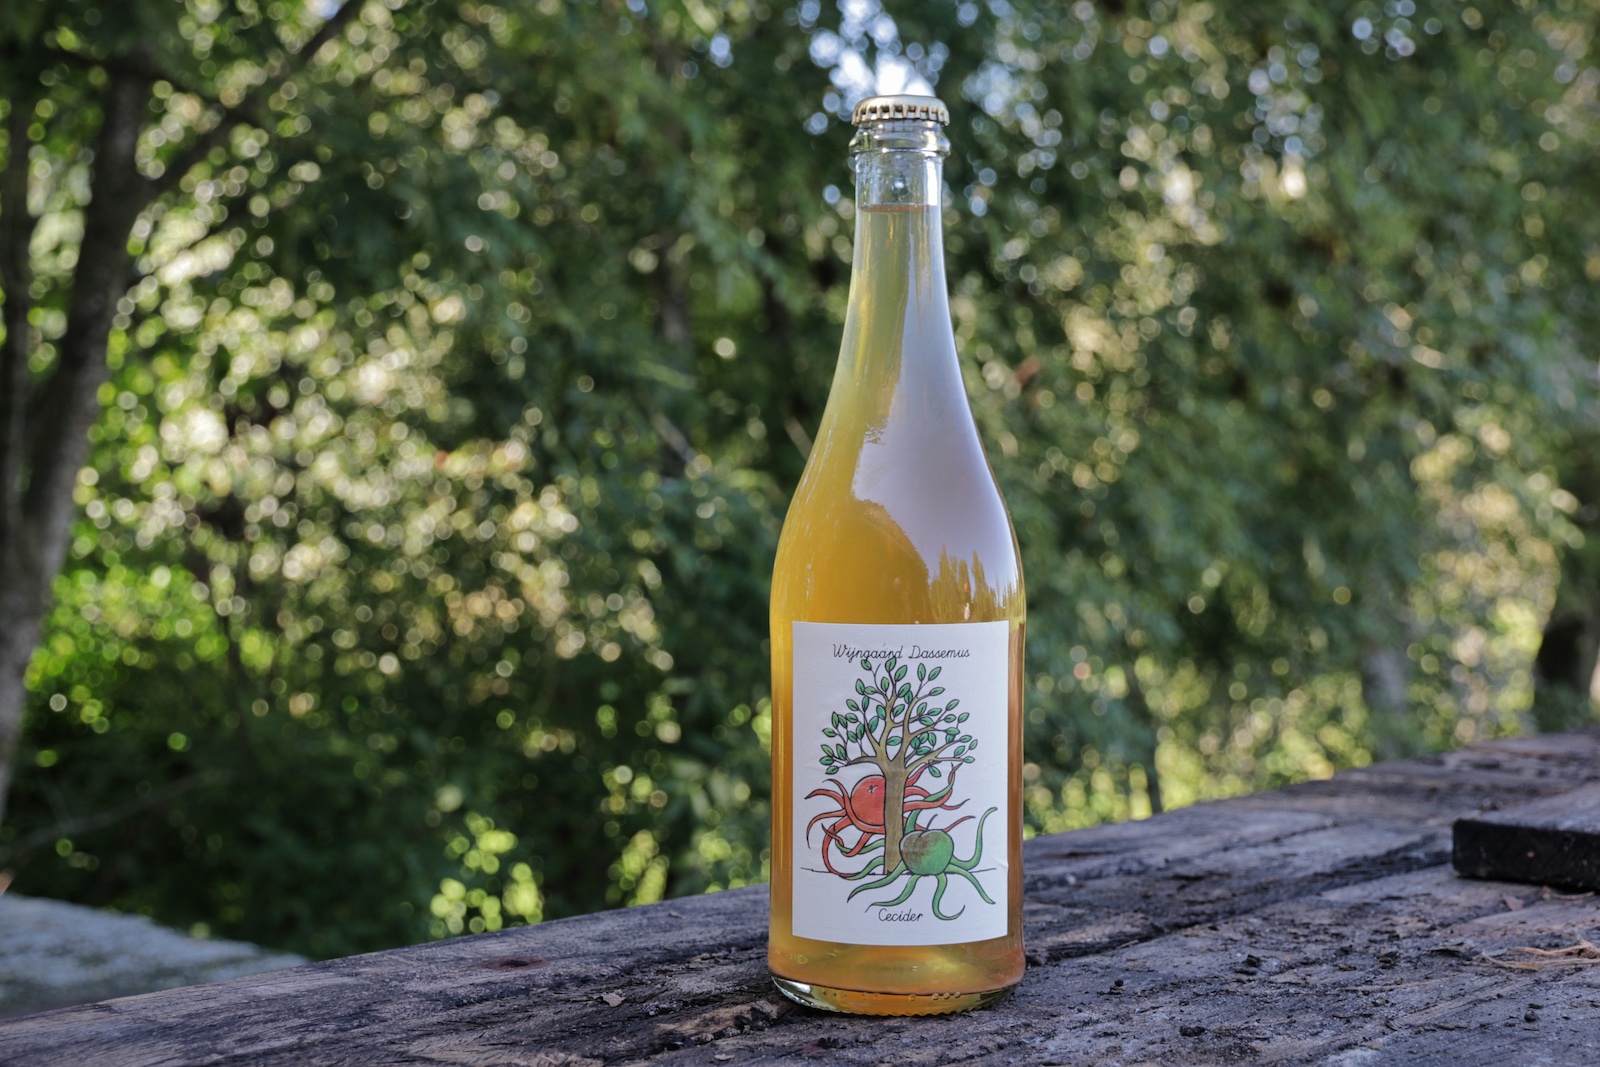 Cecider, an apple cider crossover produced by Wijngaard Dassemus